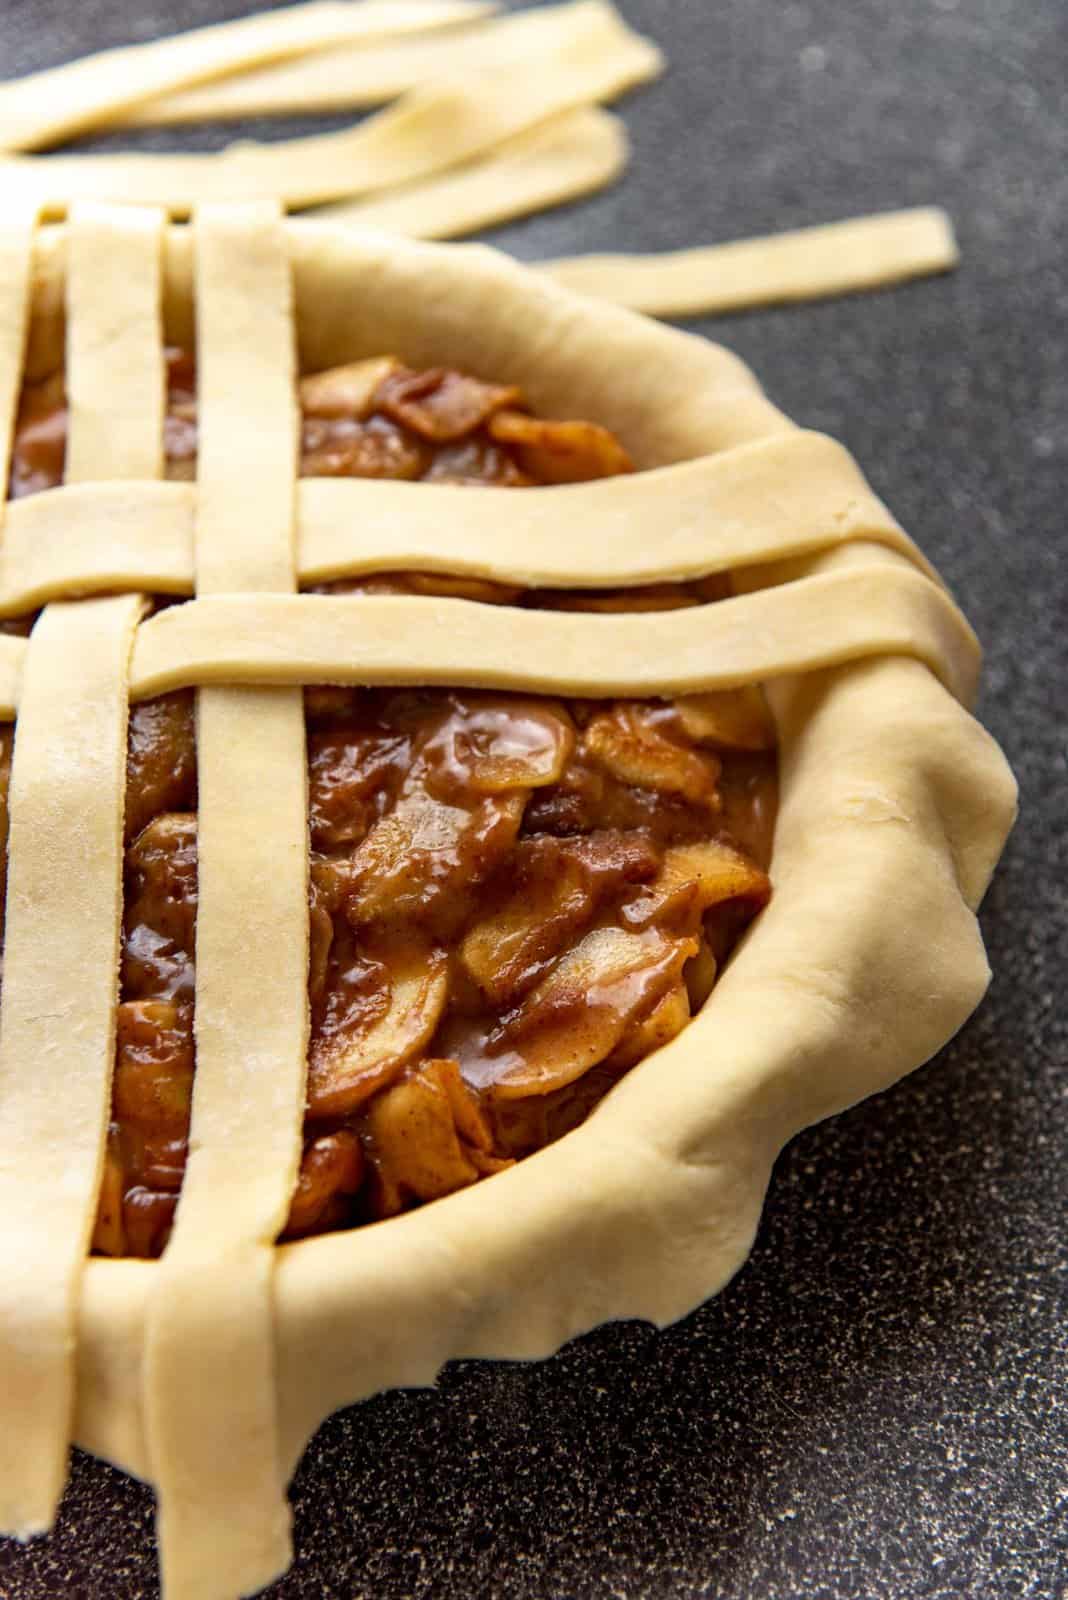 A close up of the apple filling filling the pie plate, with a lattice crust being woven on top.